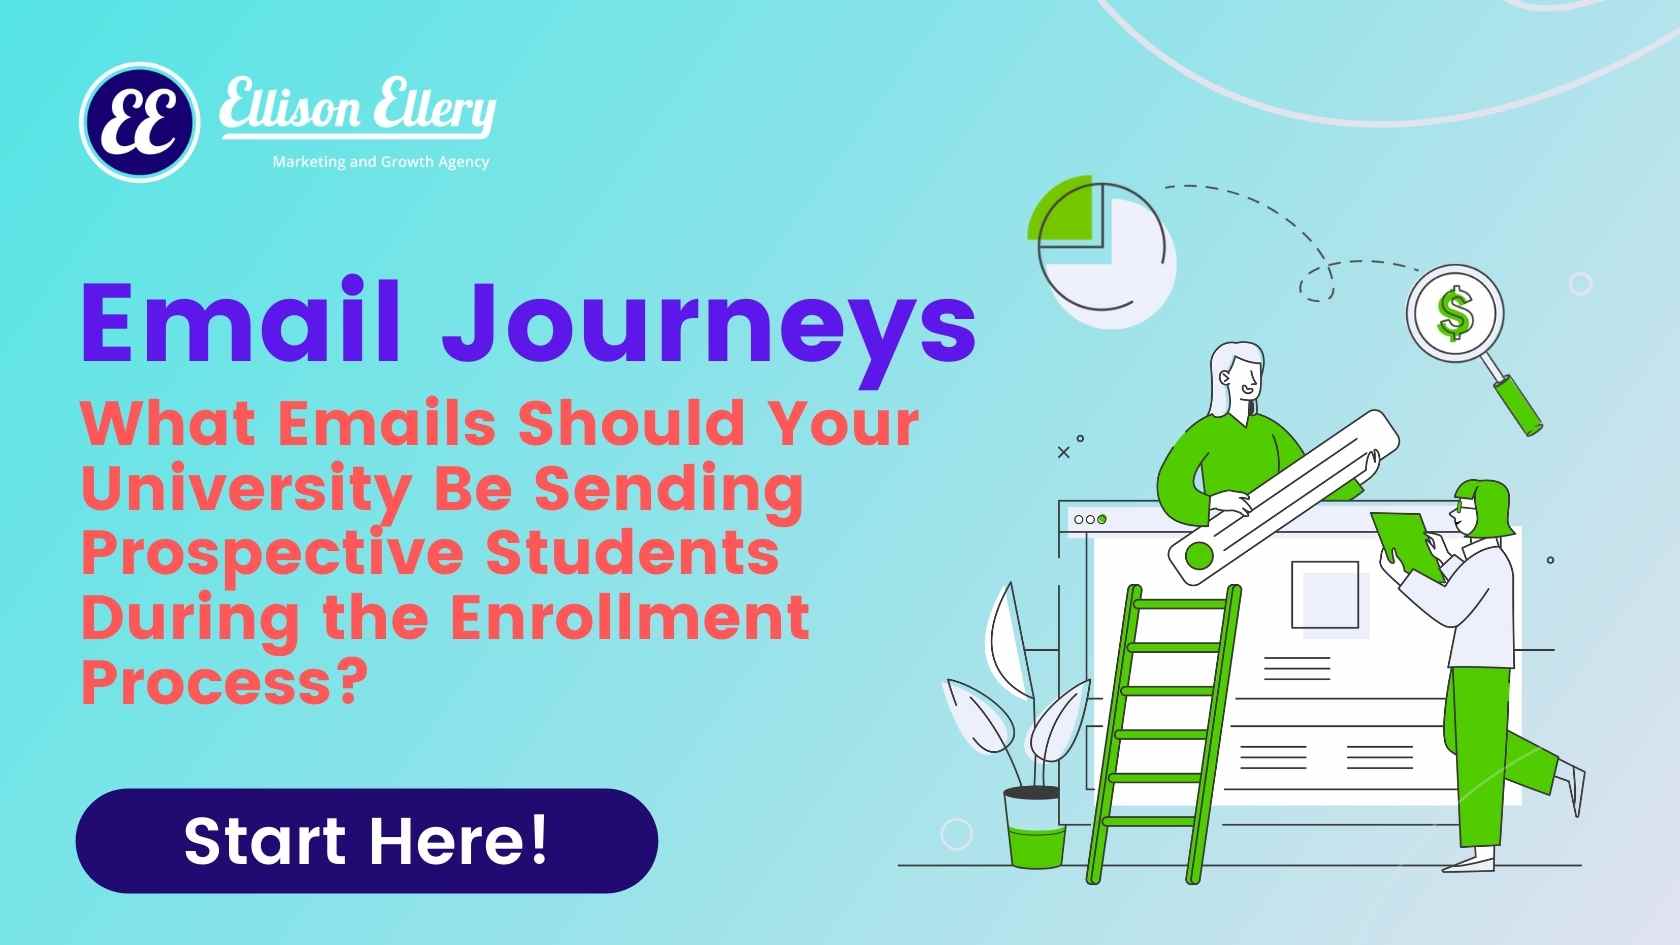 Email Journeys: What Emails Should Your University Be Sending Prospective Students During the Enrollment Process? 